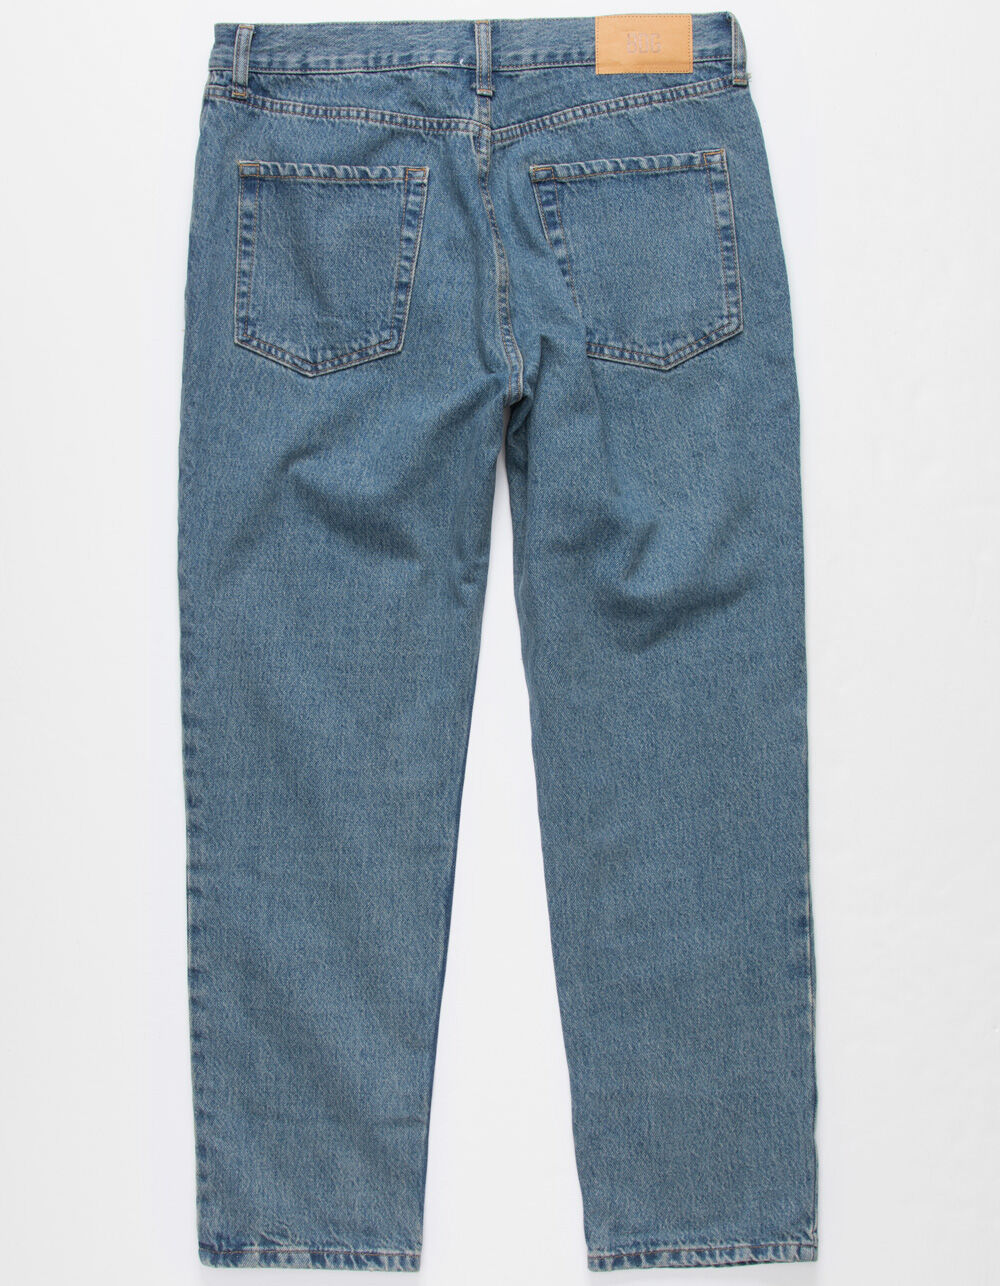 BDG Urban Outfitters Recycled Mens Dad Jeans - LIGHT WASH | Tillys